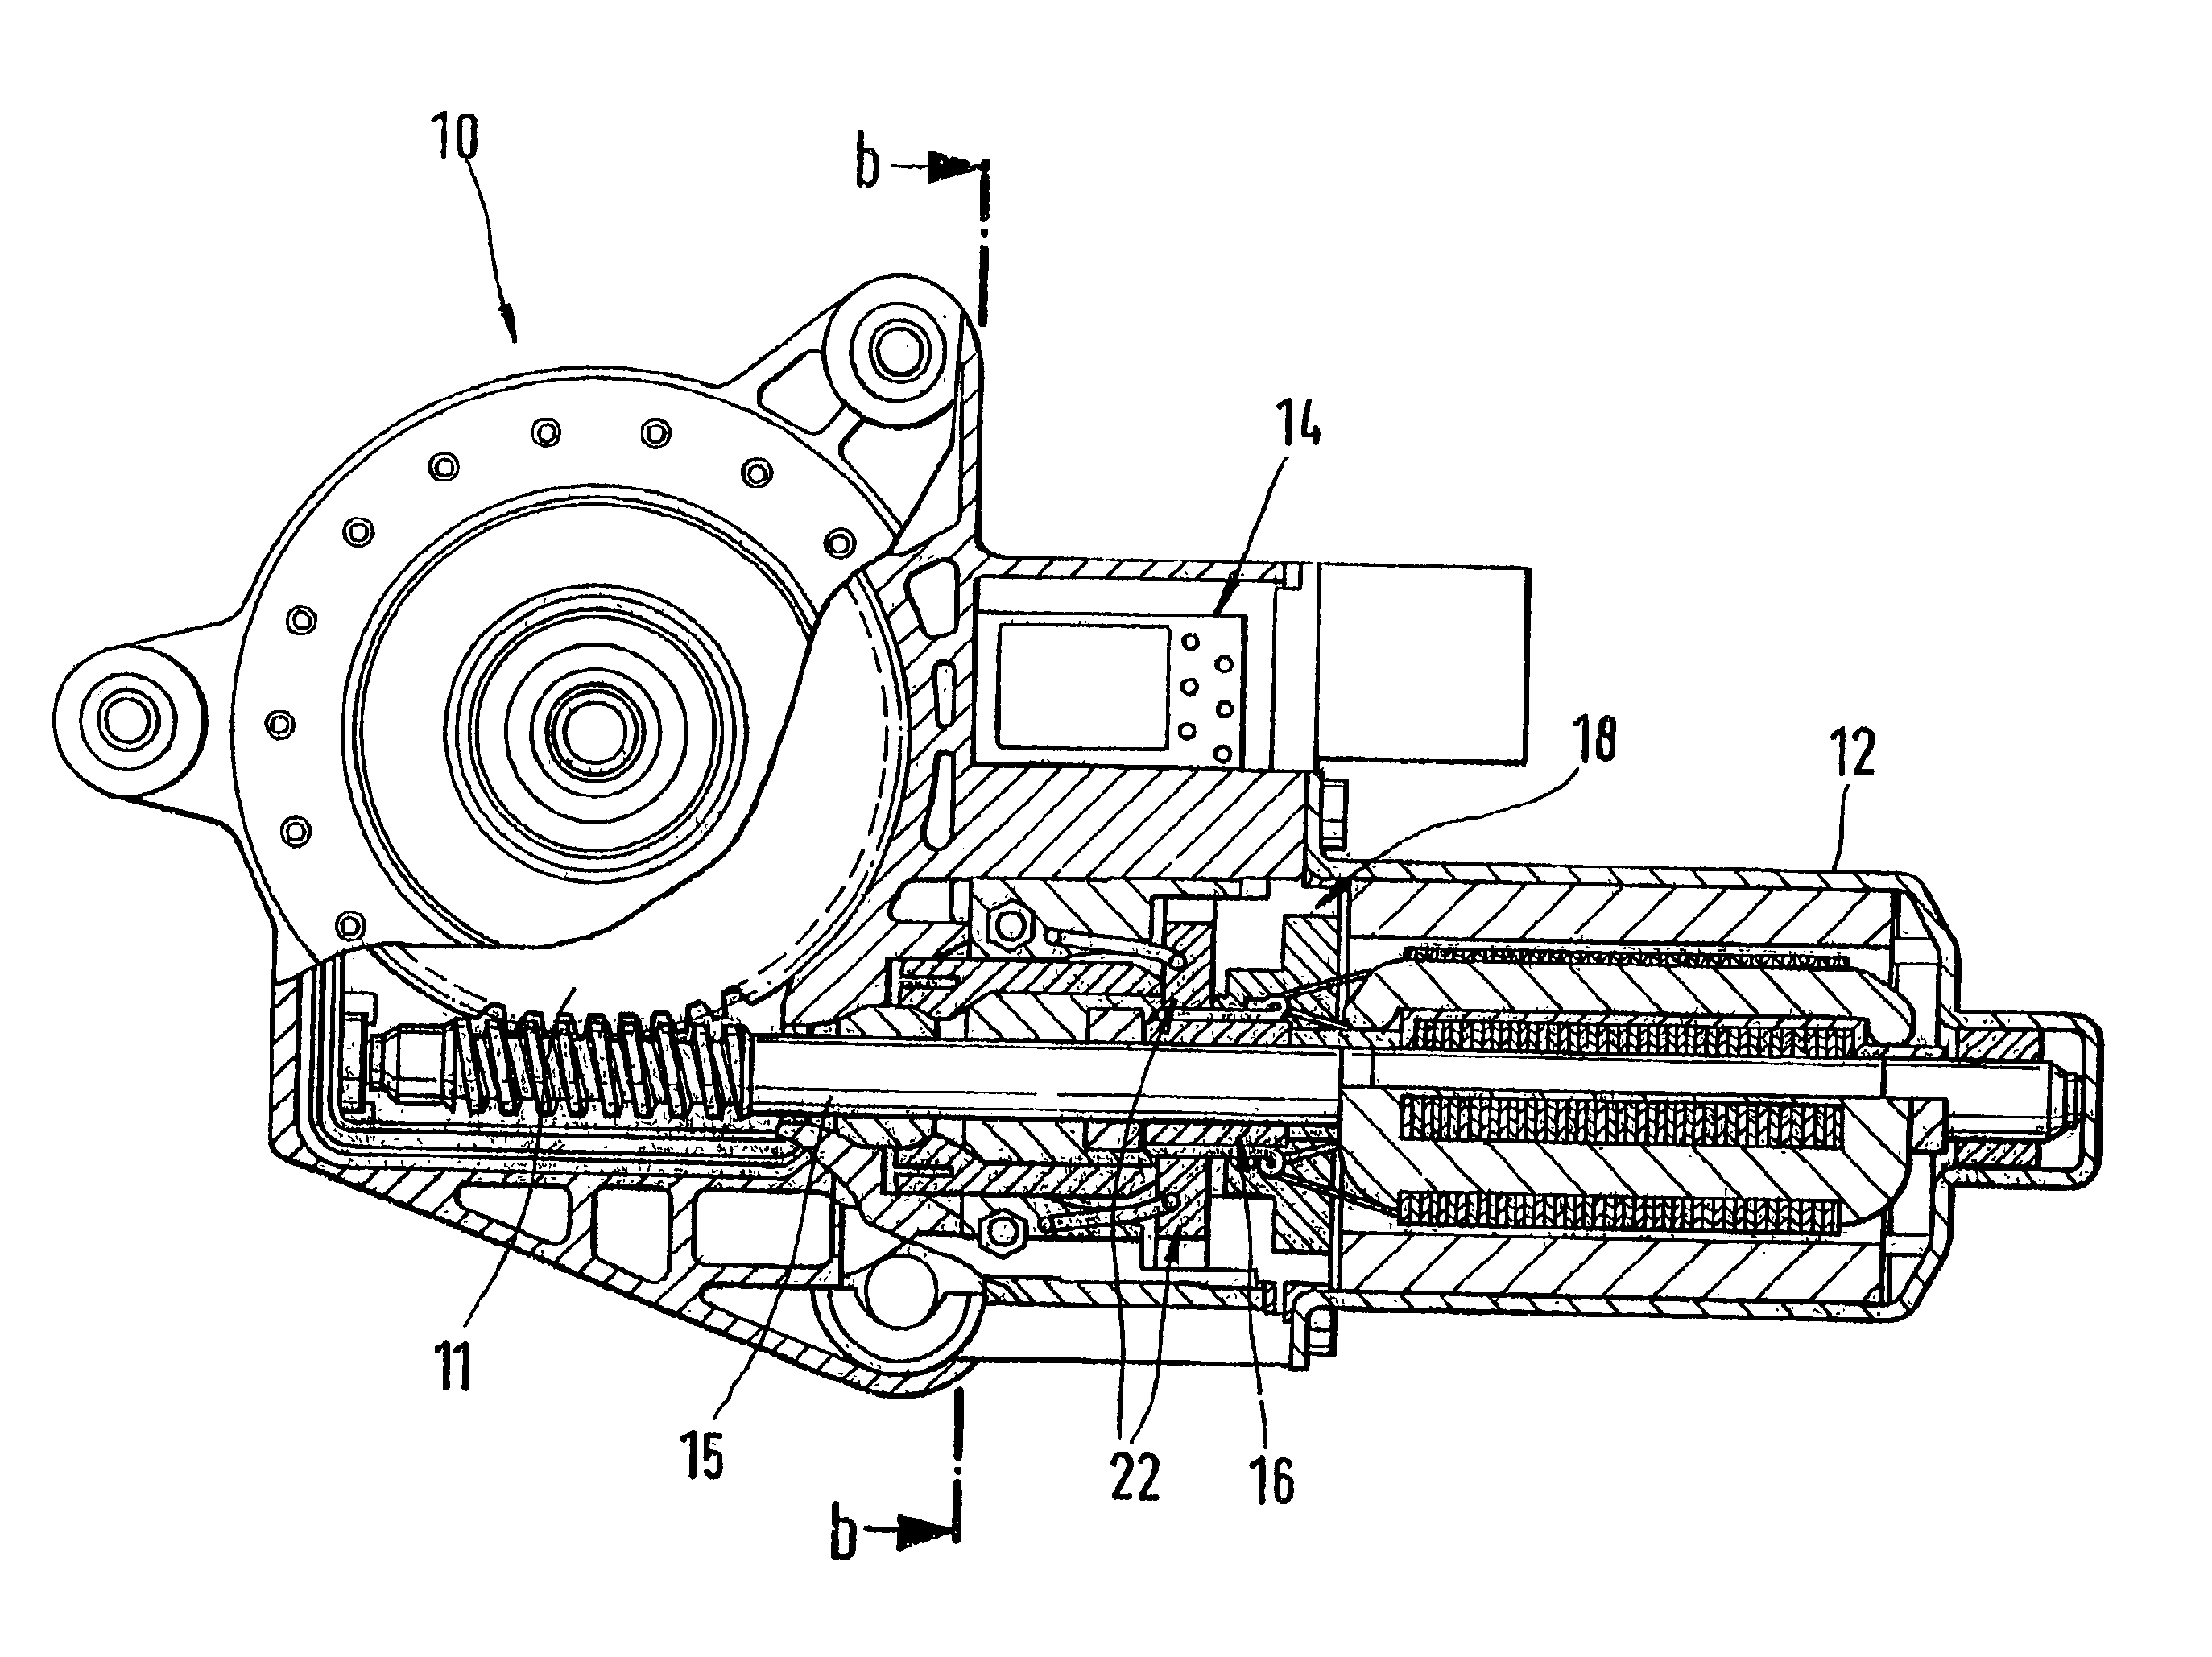 Electric motor, in particular for raising and lowering disks in motor vehicles